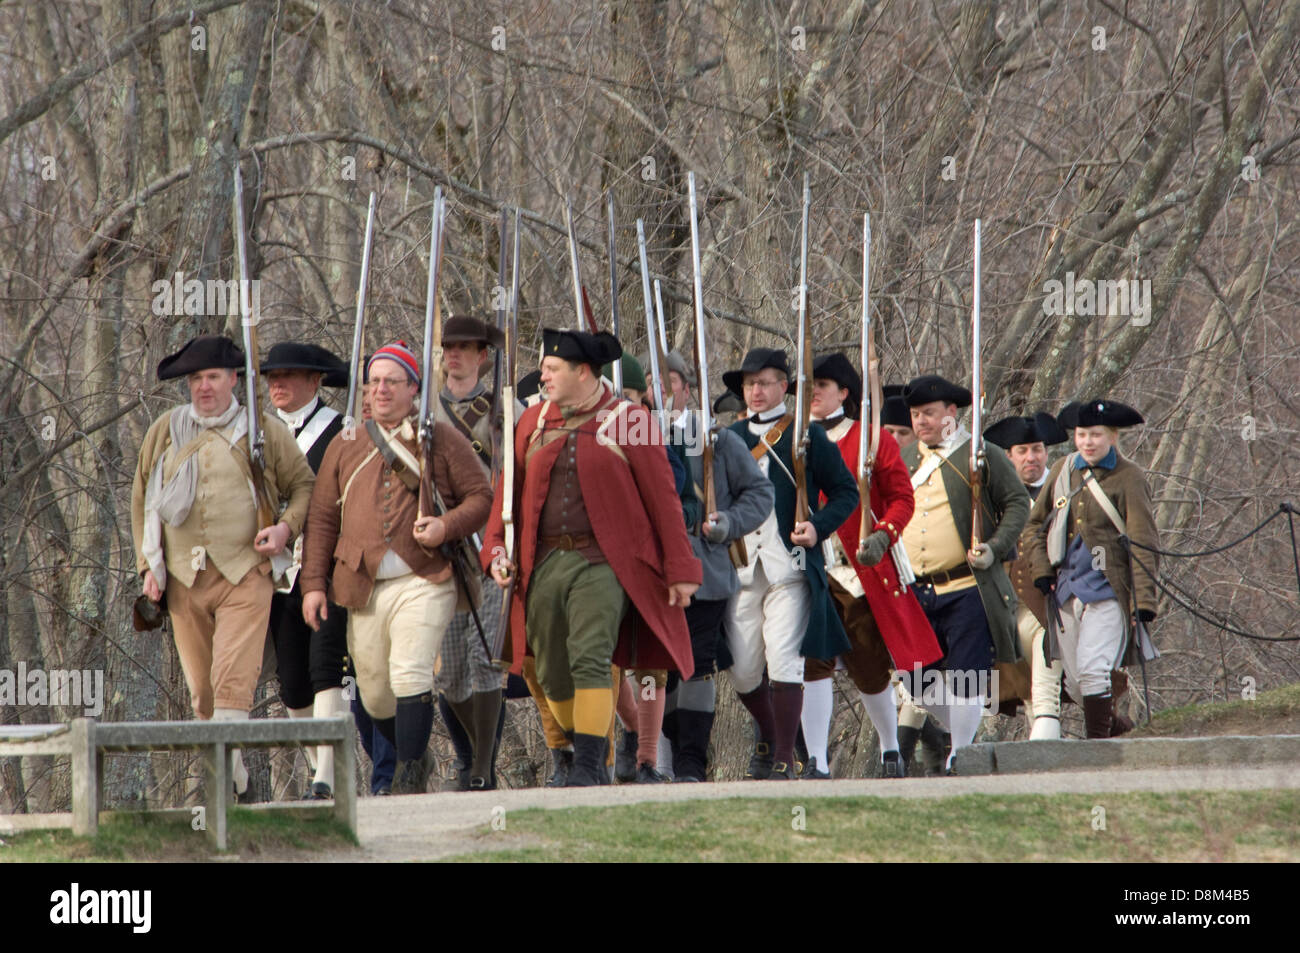 Minutemen reenactors marching to battle the British at the Battle of Concord, Minuteman National Historical Park, Concord MA. Digital photograph Stock Photo